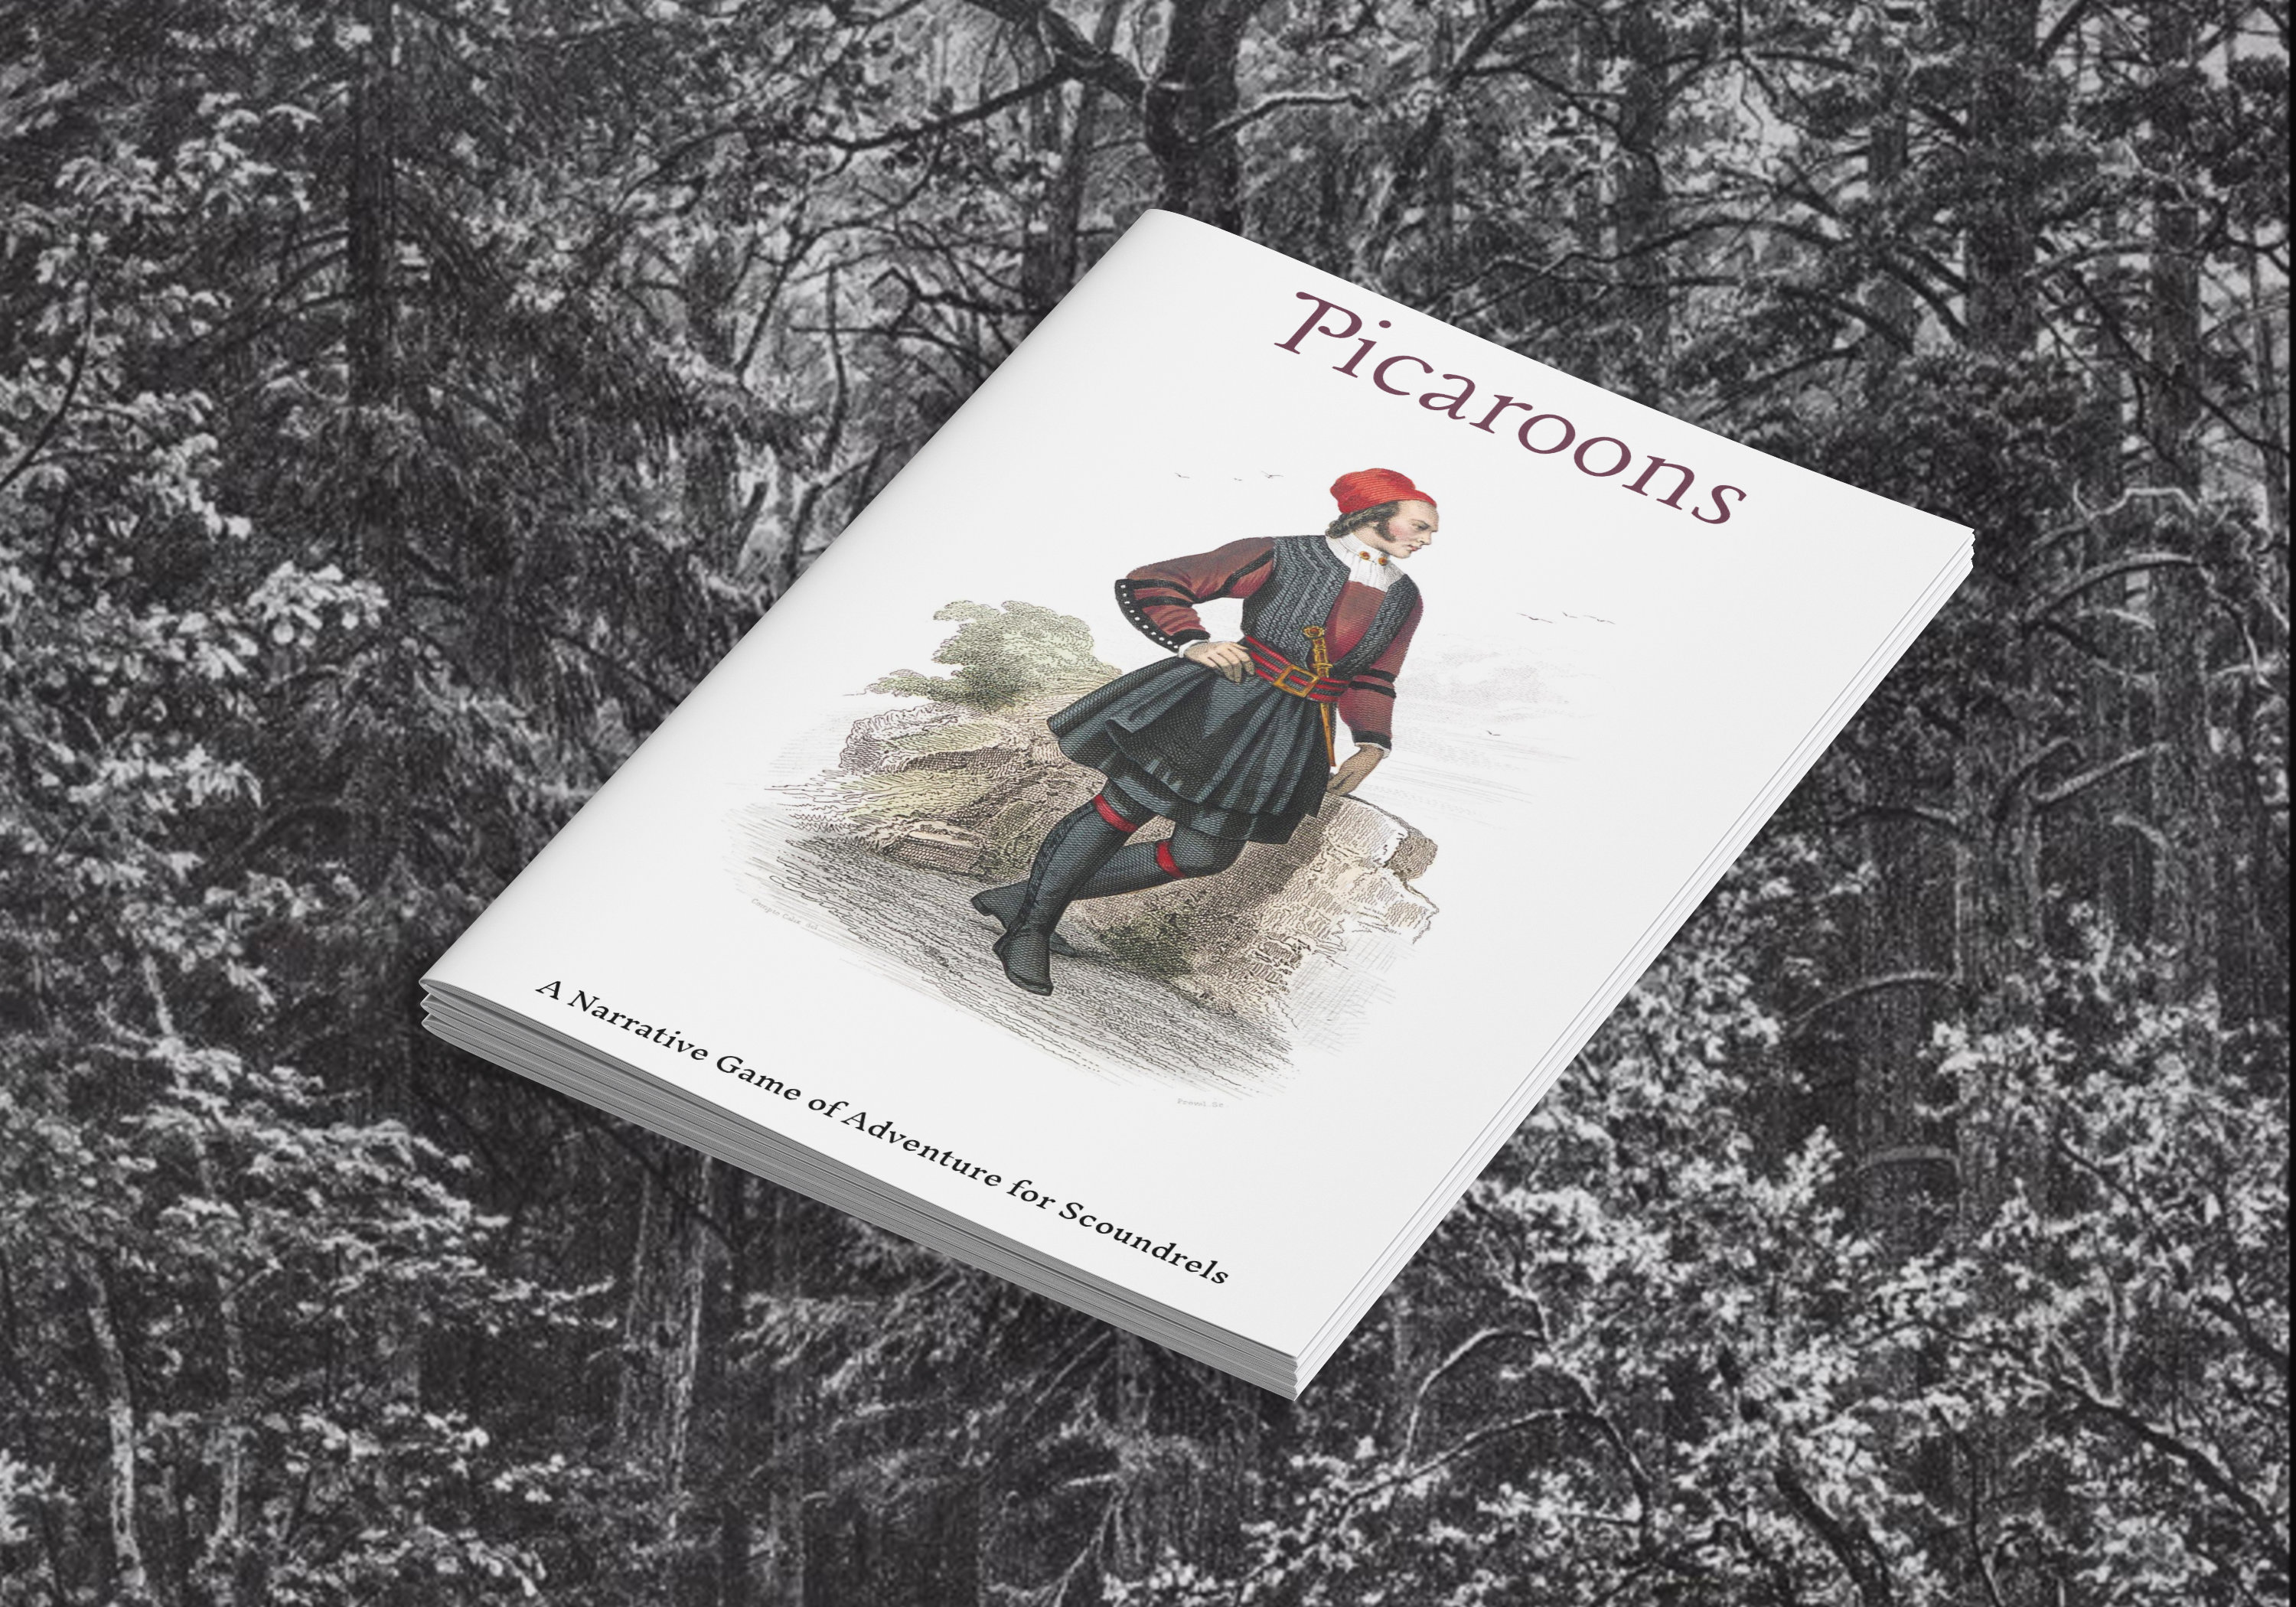 Picaroons: Collected Edition Mockup